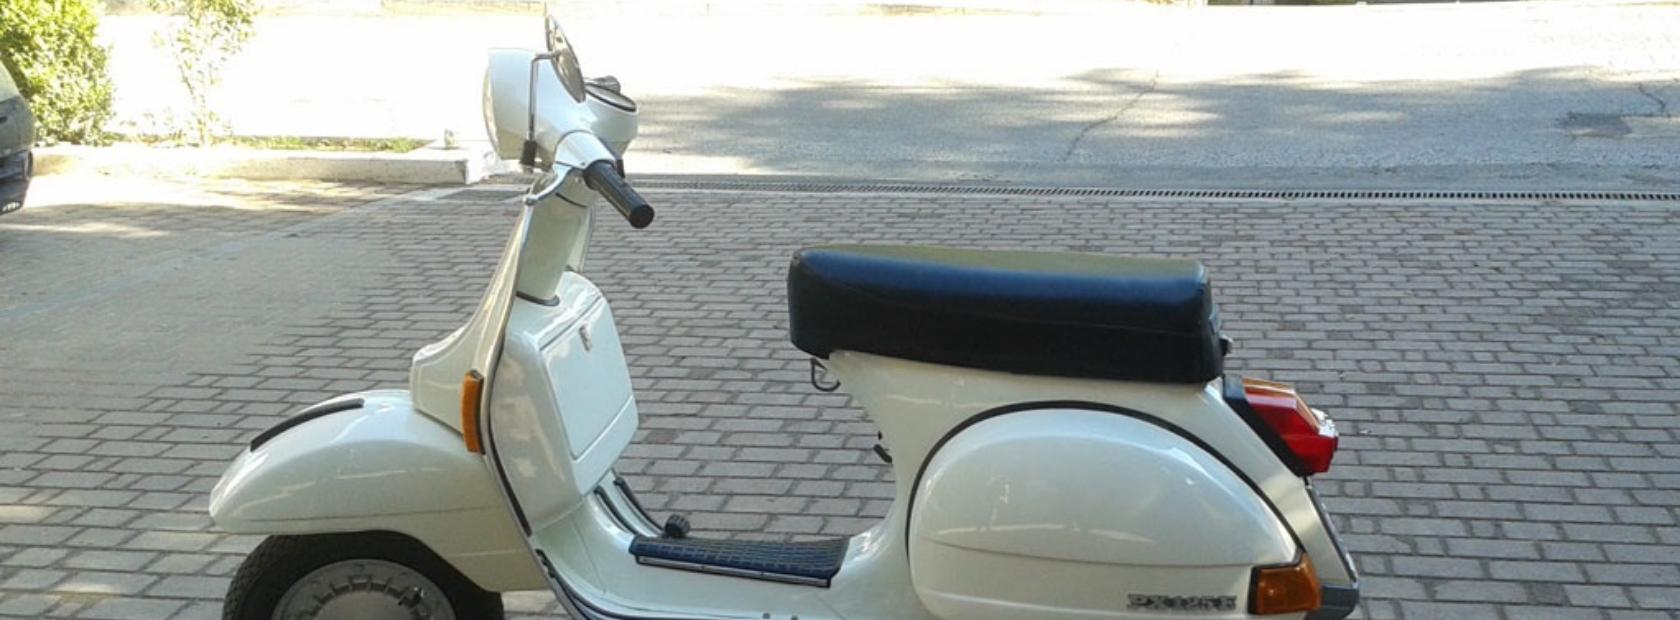 Vintage Vespa to rent for tours in Umbria or Tuscany